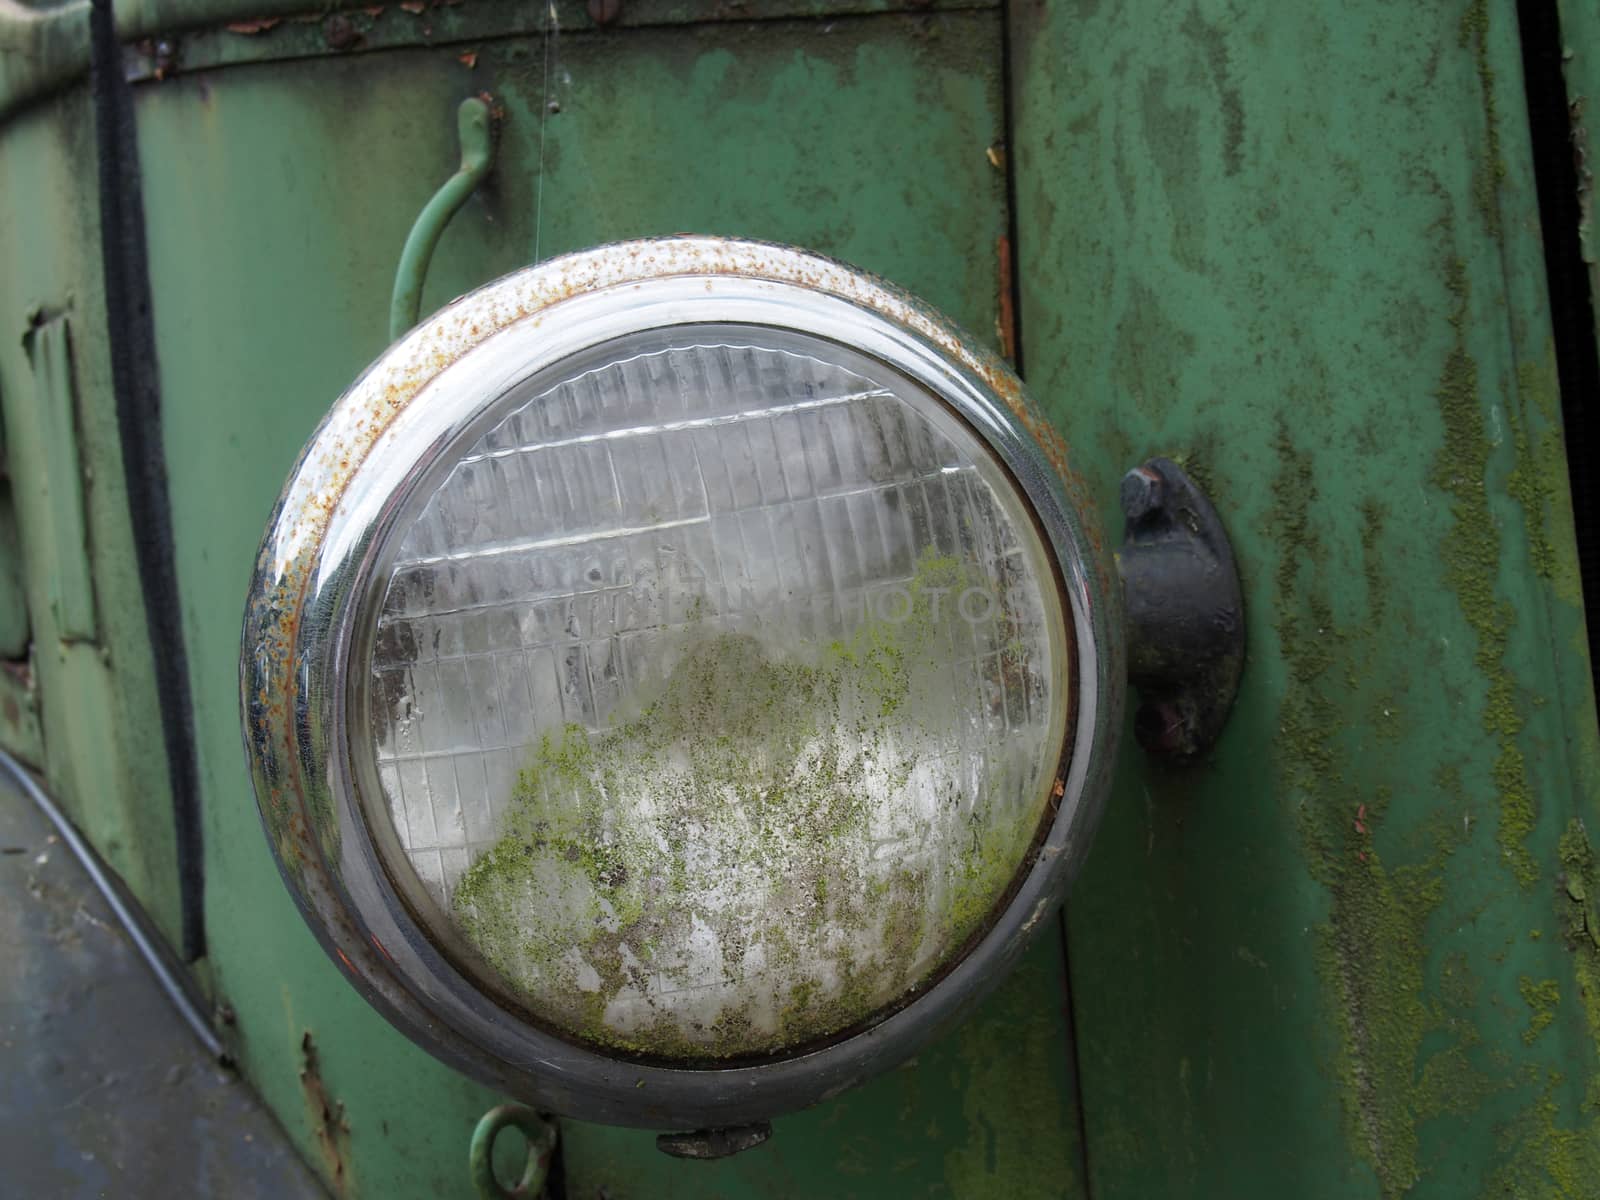 close up of the headlight of an old abandoned truck with rusted green grille and panels